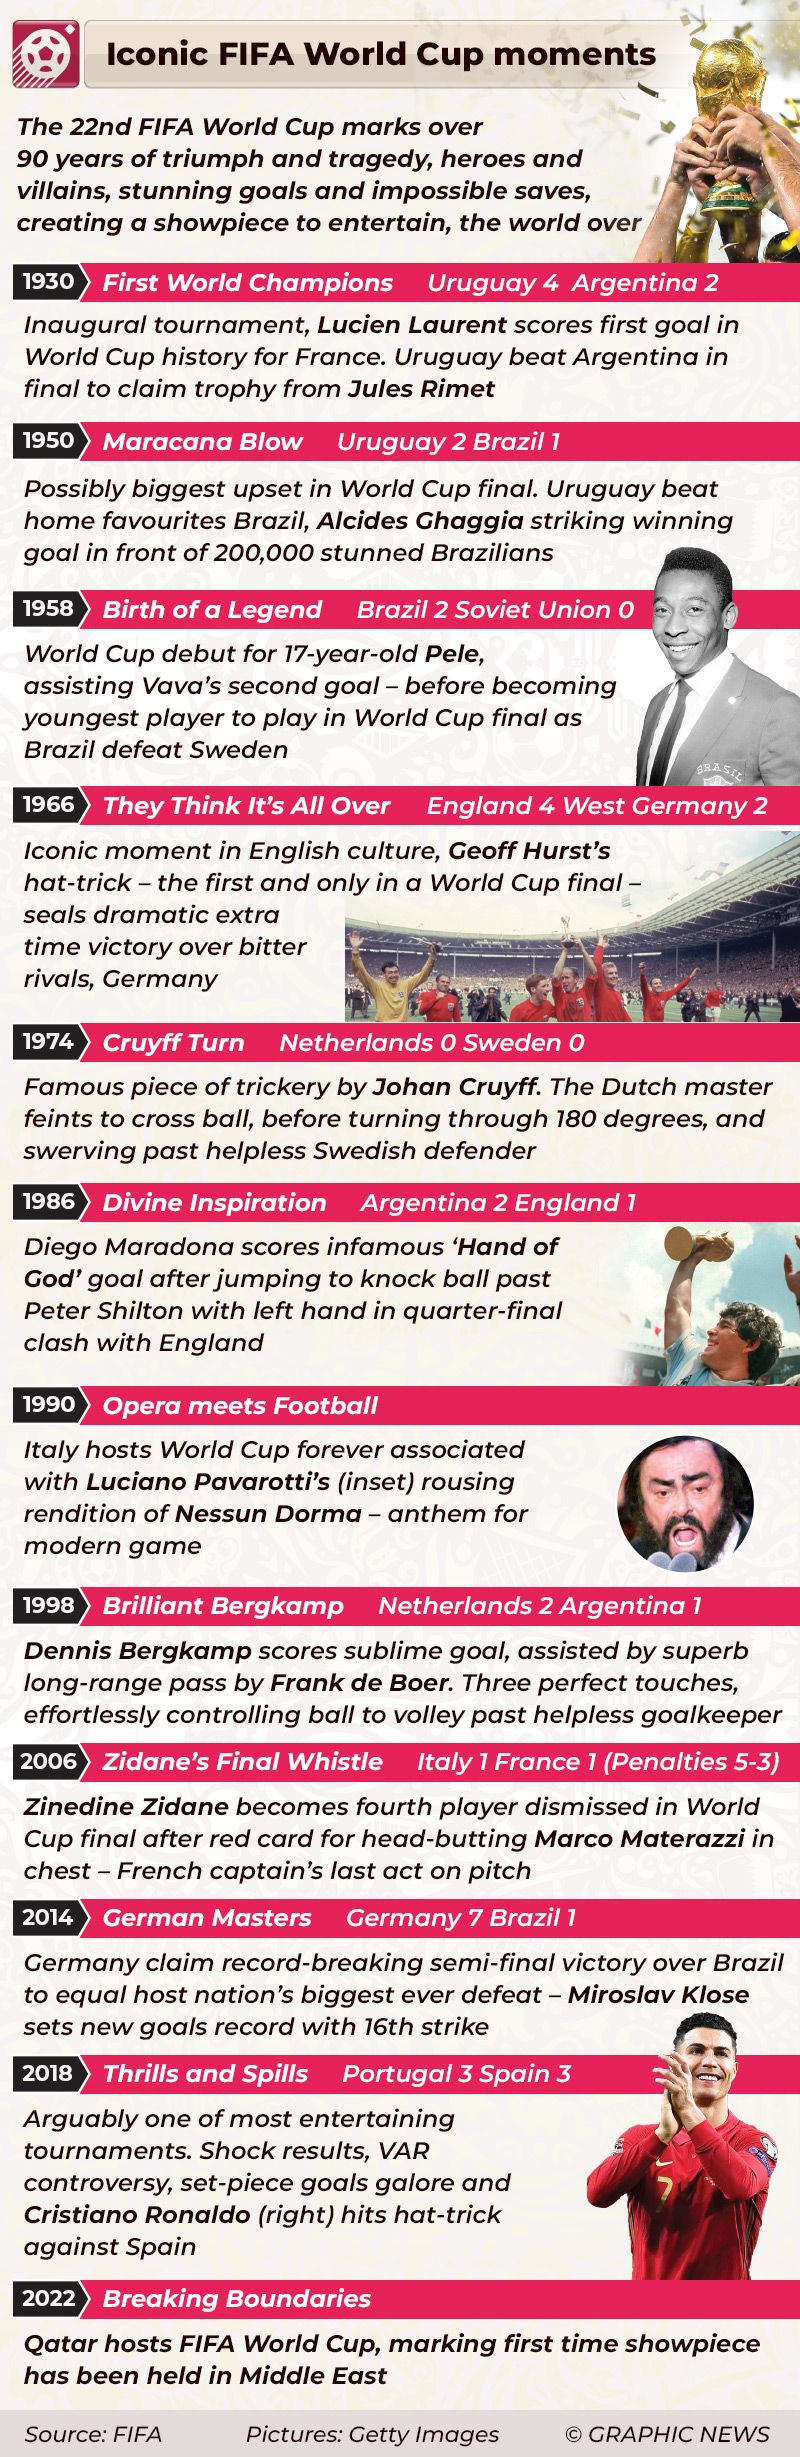 FIFA-World-Cup-Iconic-Moments - updated